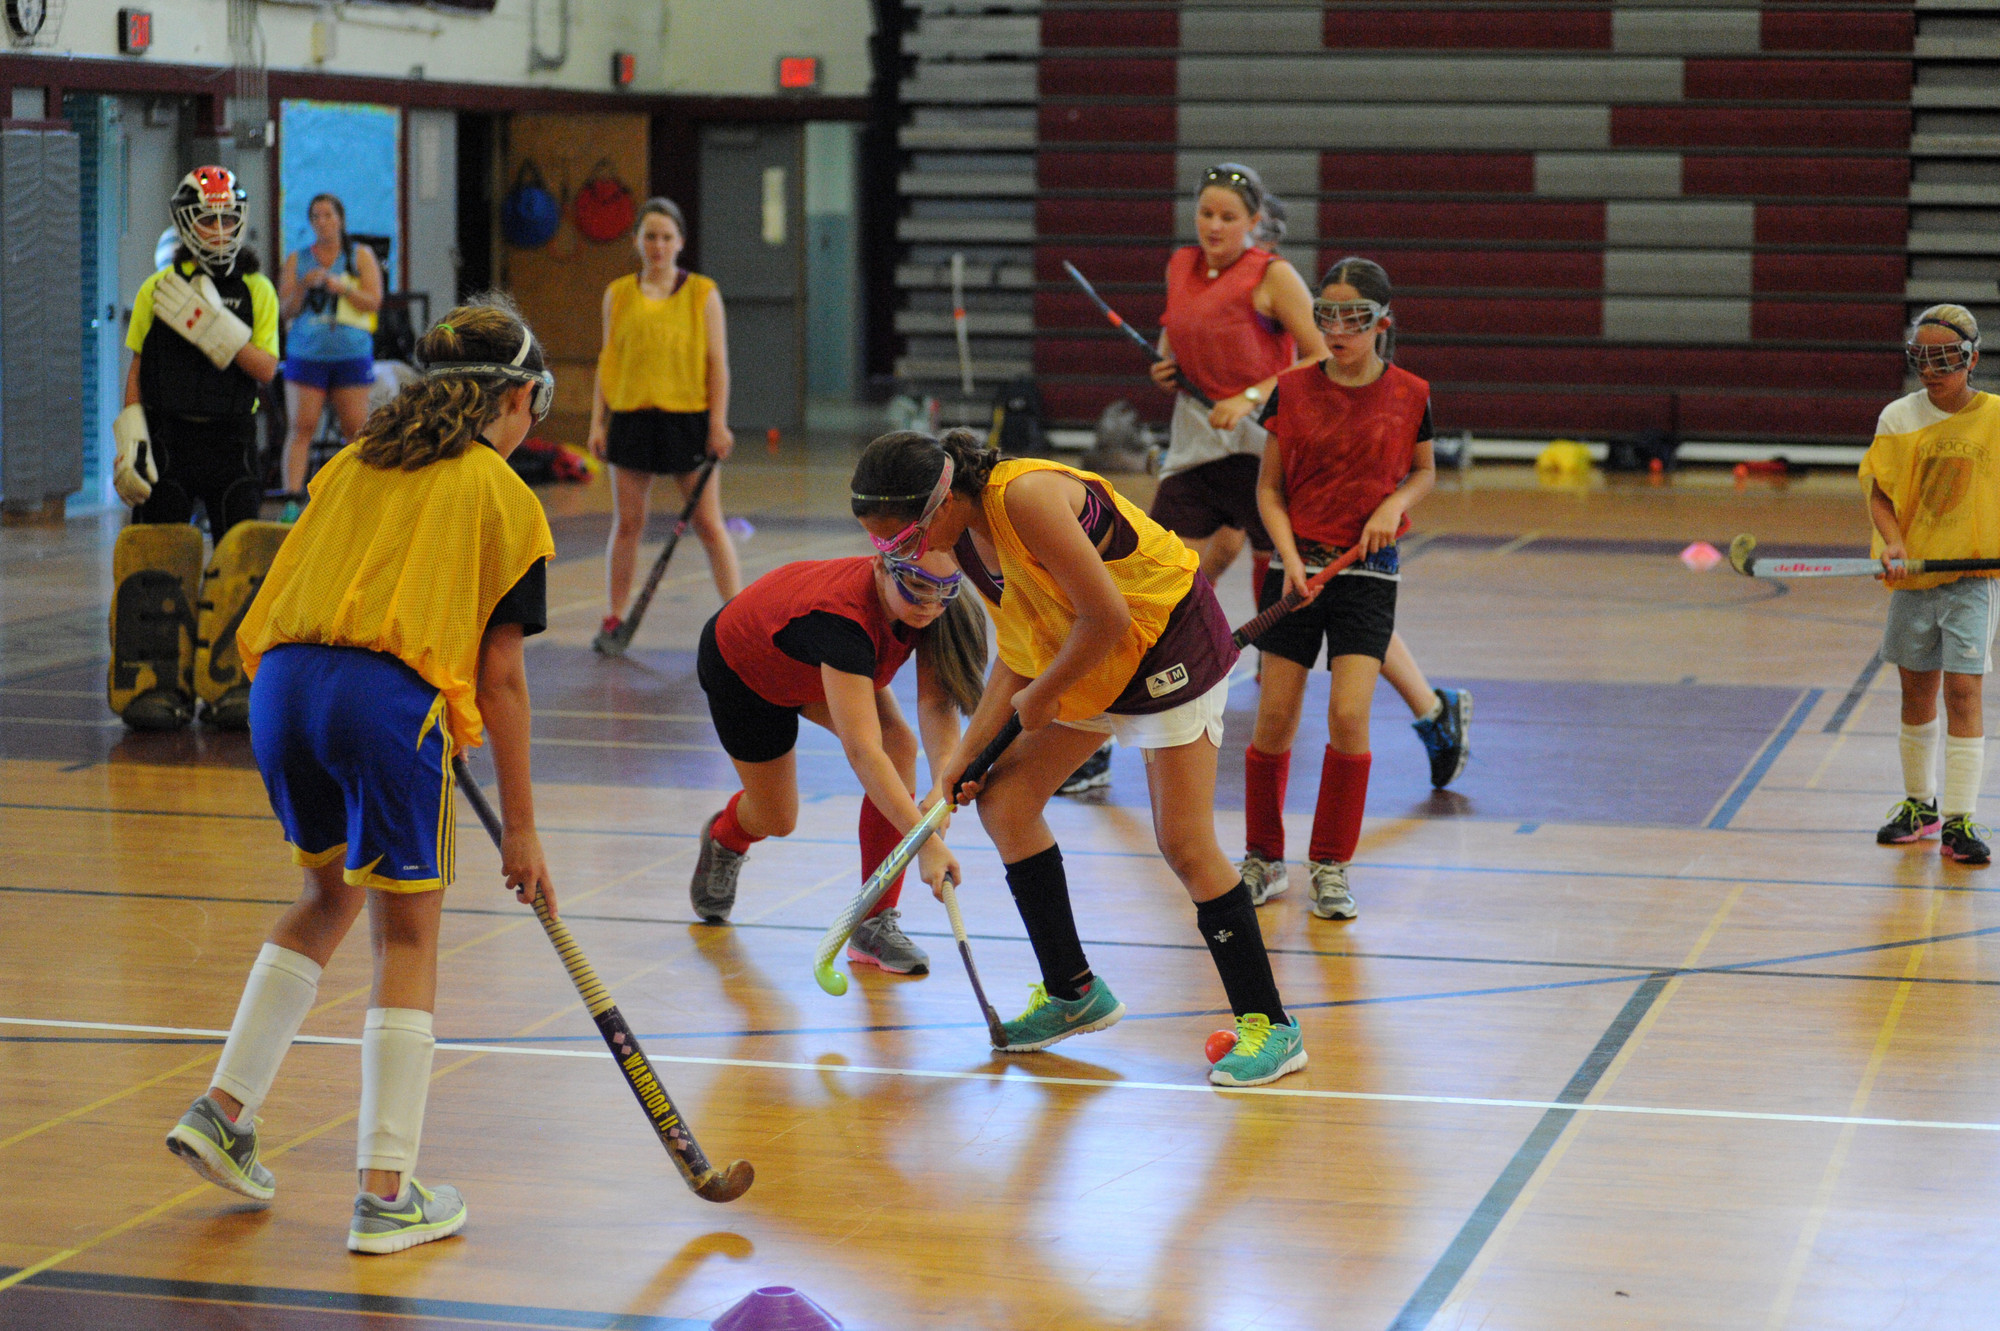 Faith Coughlin and Gabriella Sferrazza battled for a loose ball in a game of field hockey, which has been played at Clarke High School since 1959.